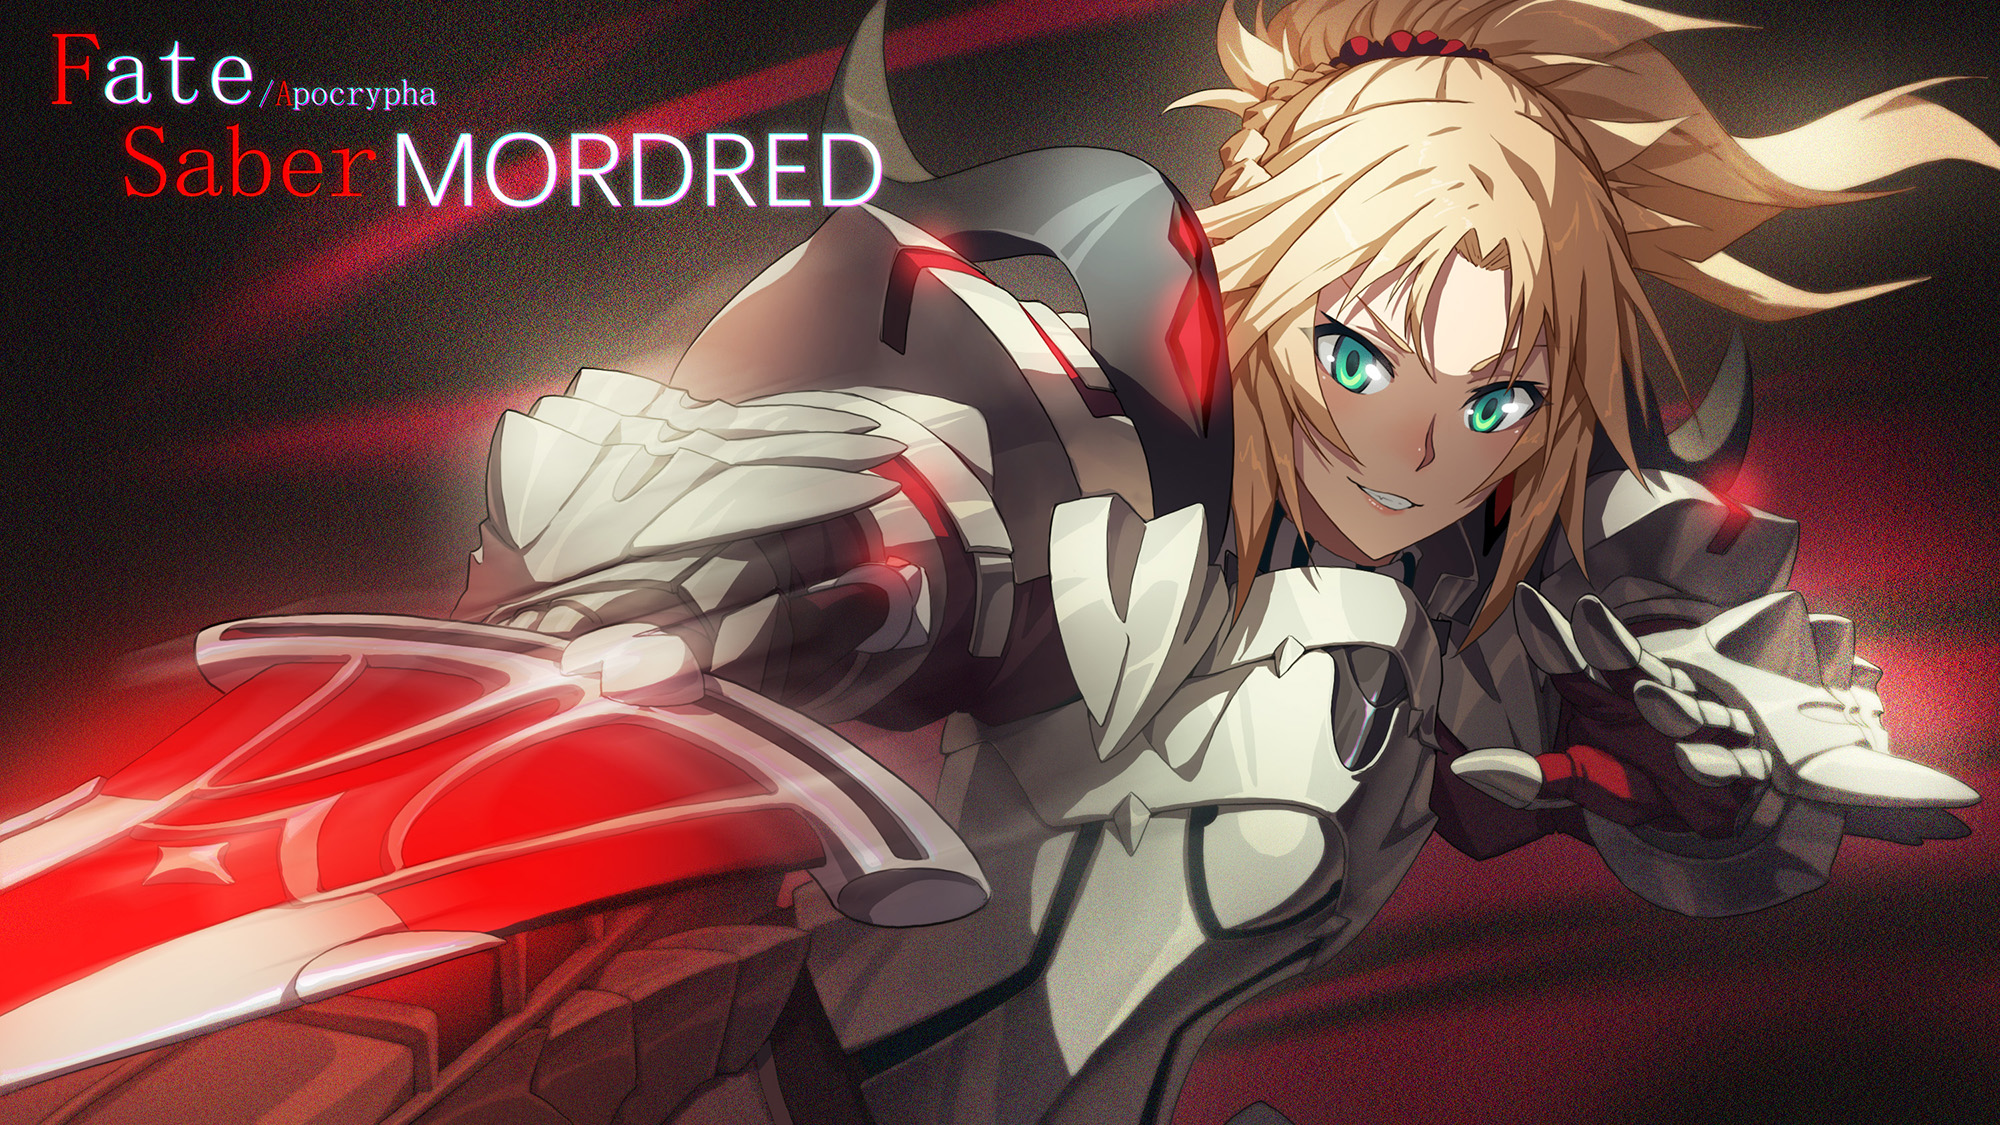 android mordred (fate/apocrypha), anime, fate/apocrypha, saber of red (fate/apocrypha), fate series